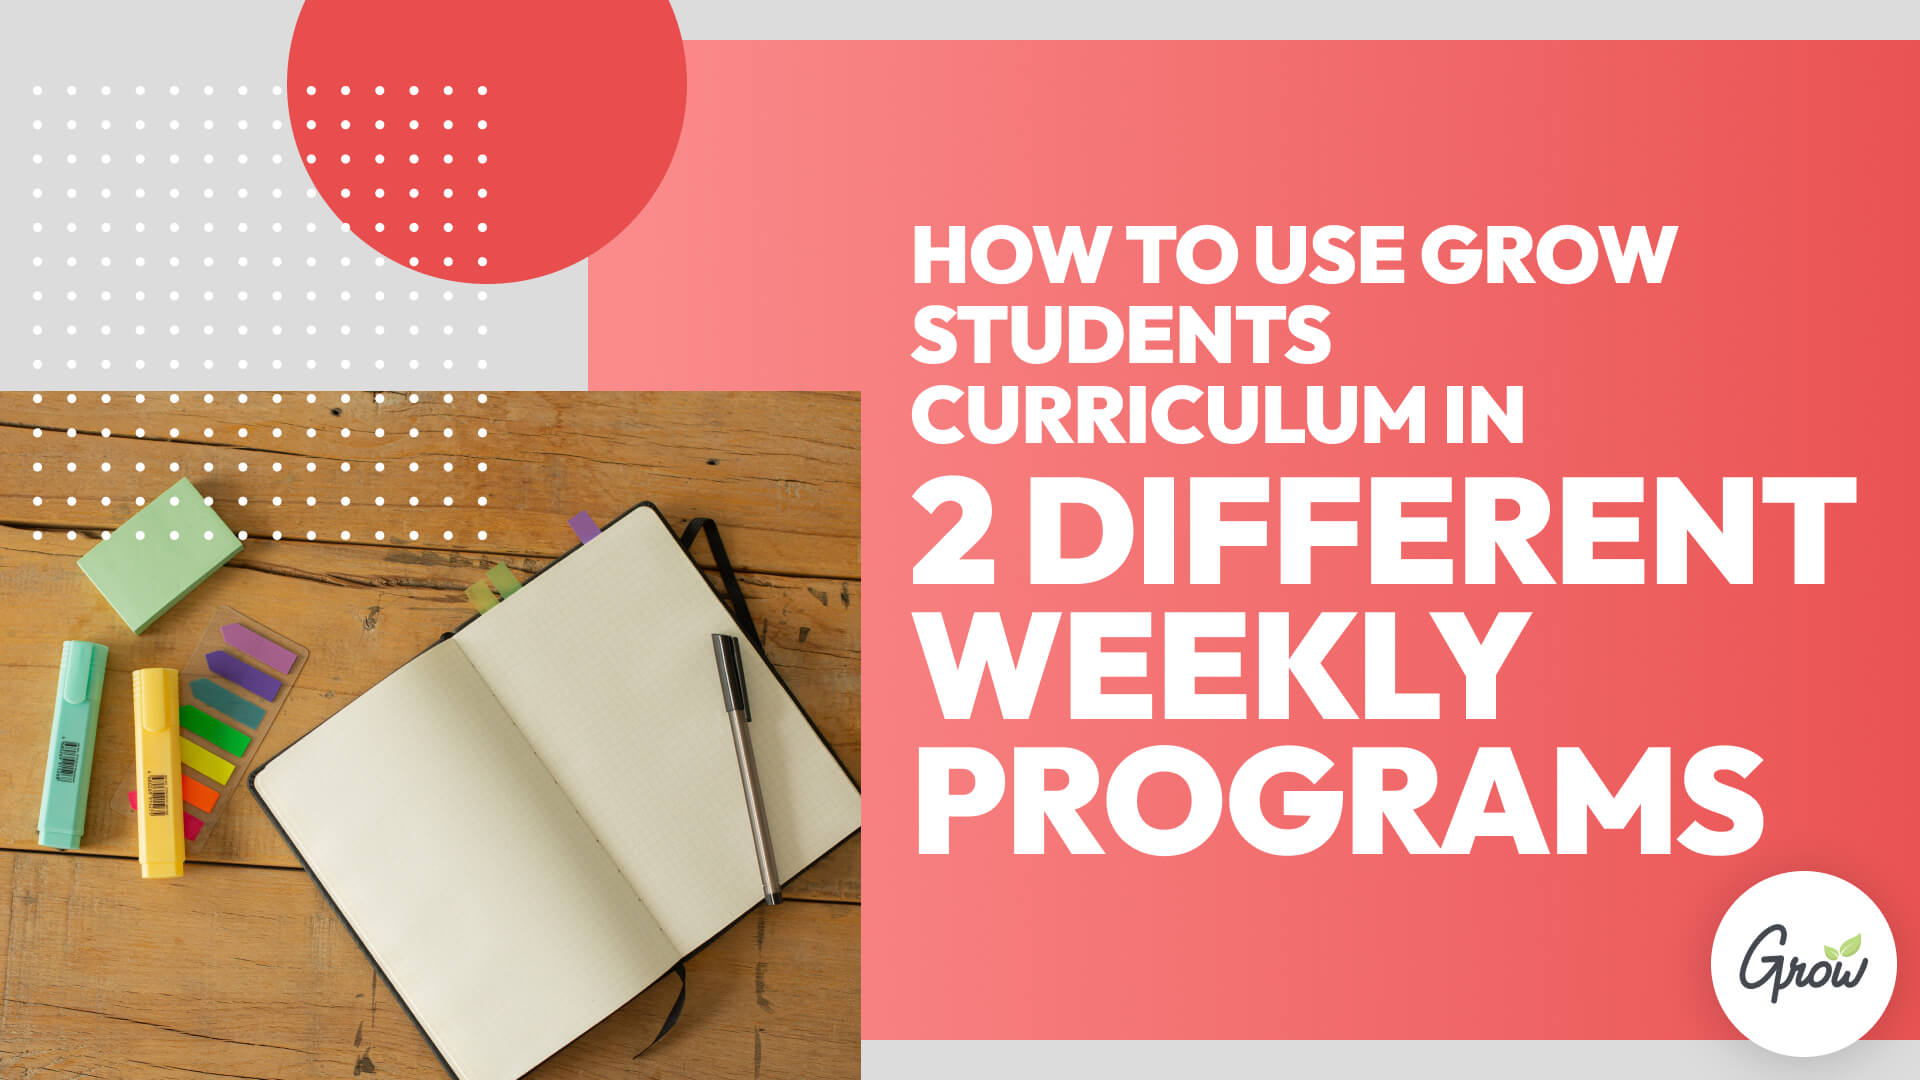 How to Use Grow Students Curriculum in 2 Different Weekly Programs